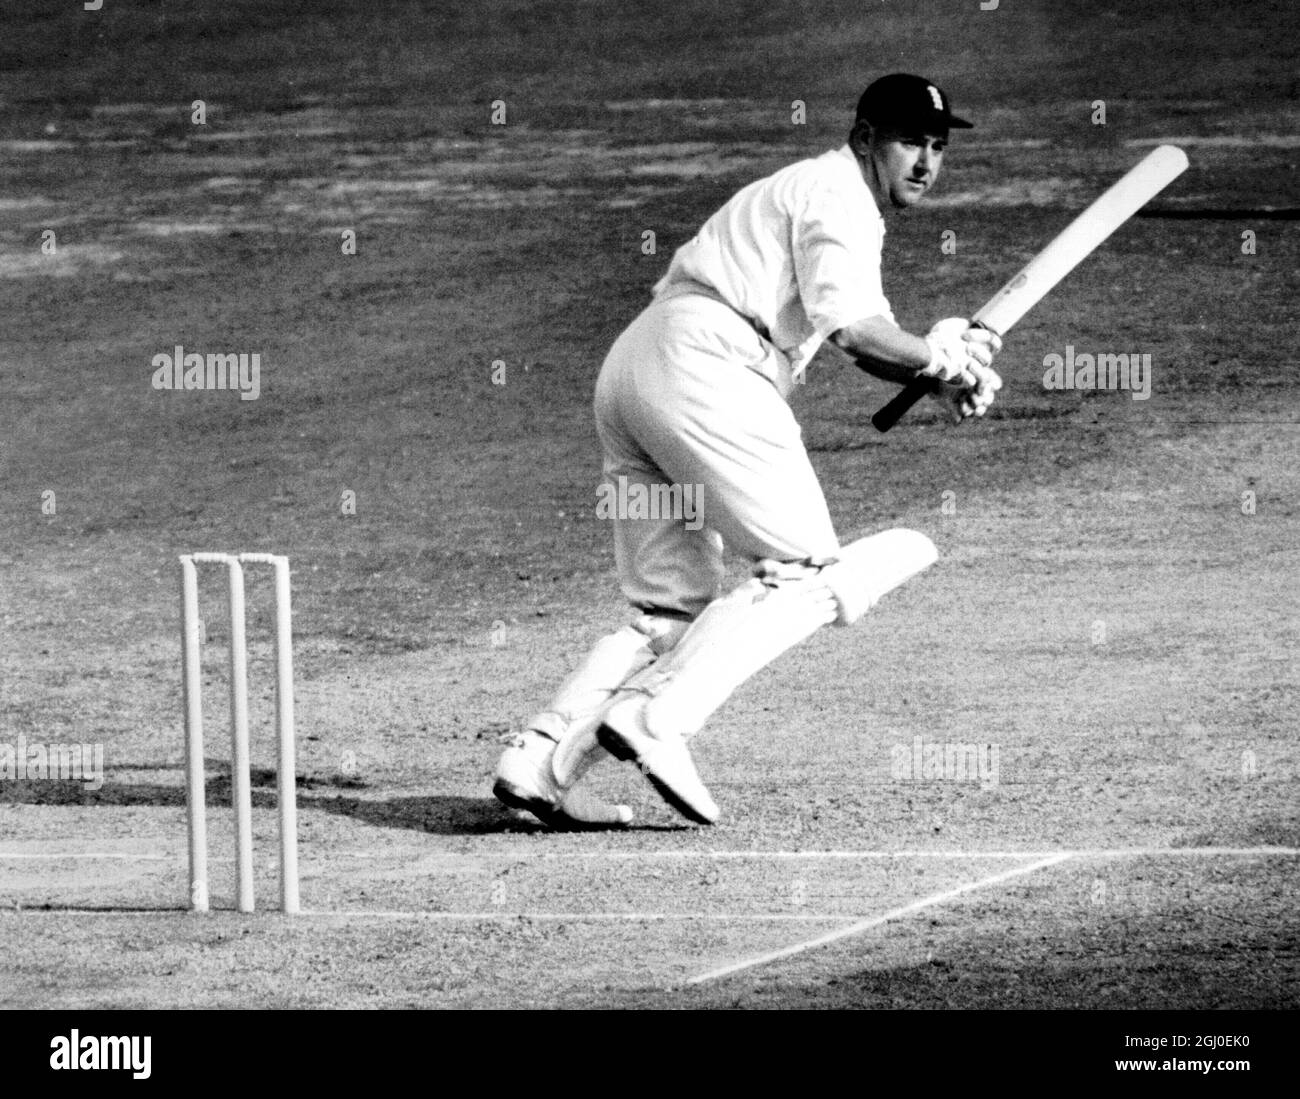 England v South Africa - Third Test Match at The Oval. Colin Cowdrey batting. 31st August 1965 Stock Photo